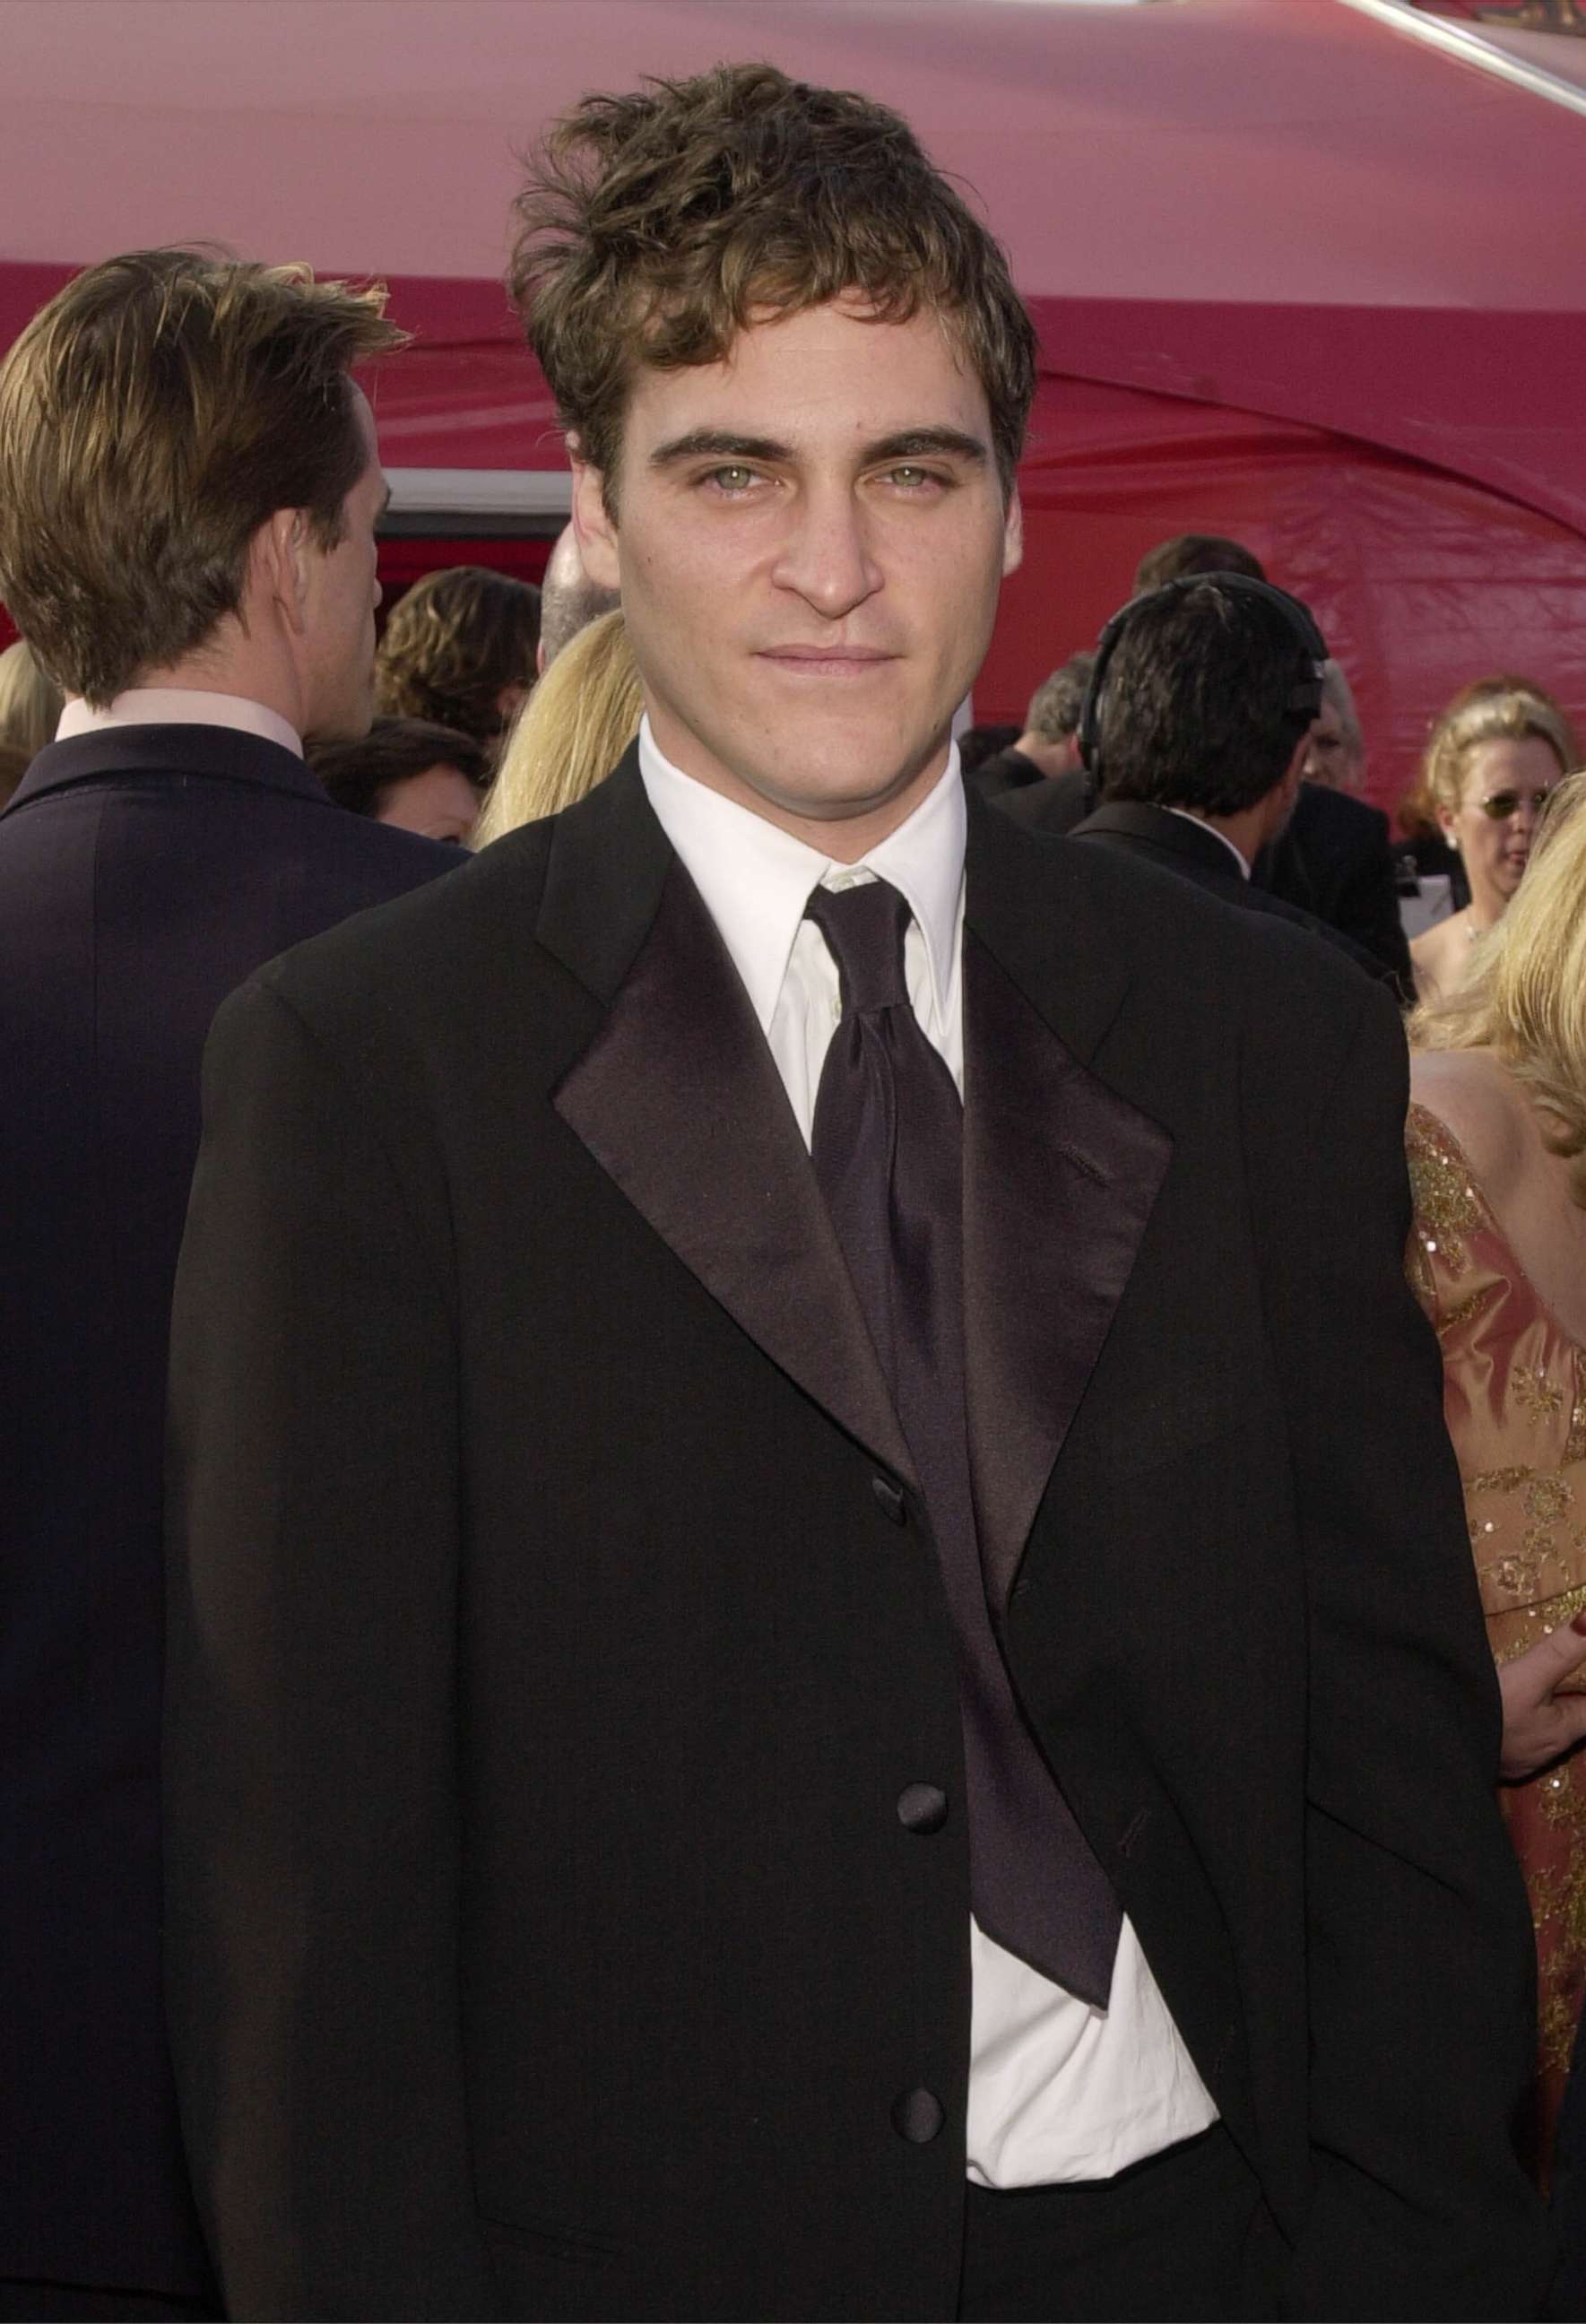 PHOTO: 386900 113: Actor Joaquin Phoenix arrives for the 73rd Annual Academy Awards March 25, 2001 at the Shrine Auditorium in Los Angeles. Phoenix is wearing an Armani suit. (Photo by Chris Weeks/Getty Images)